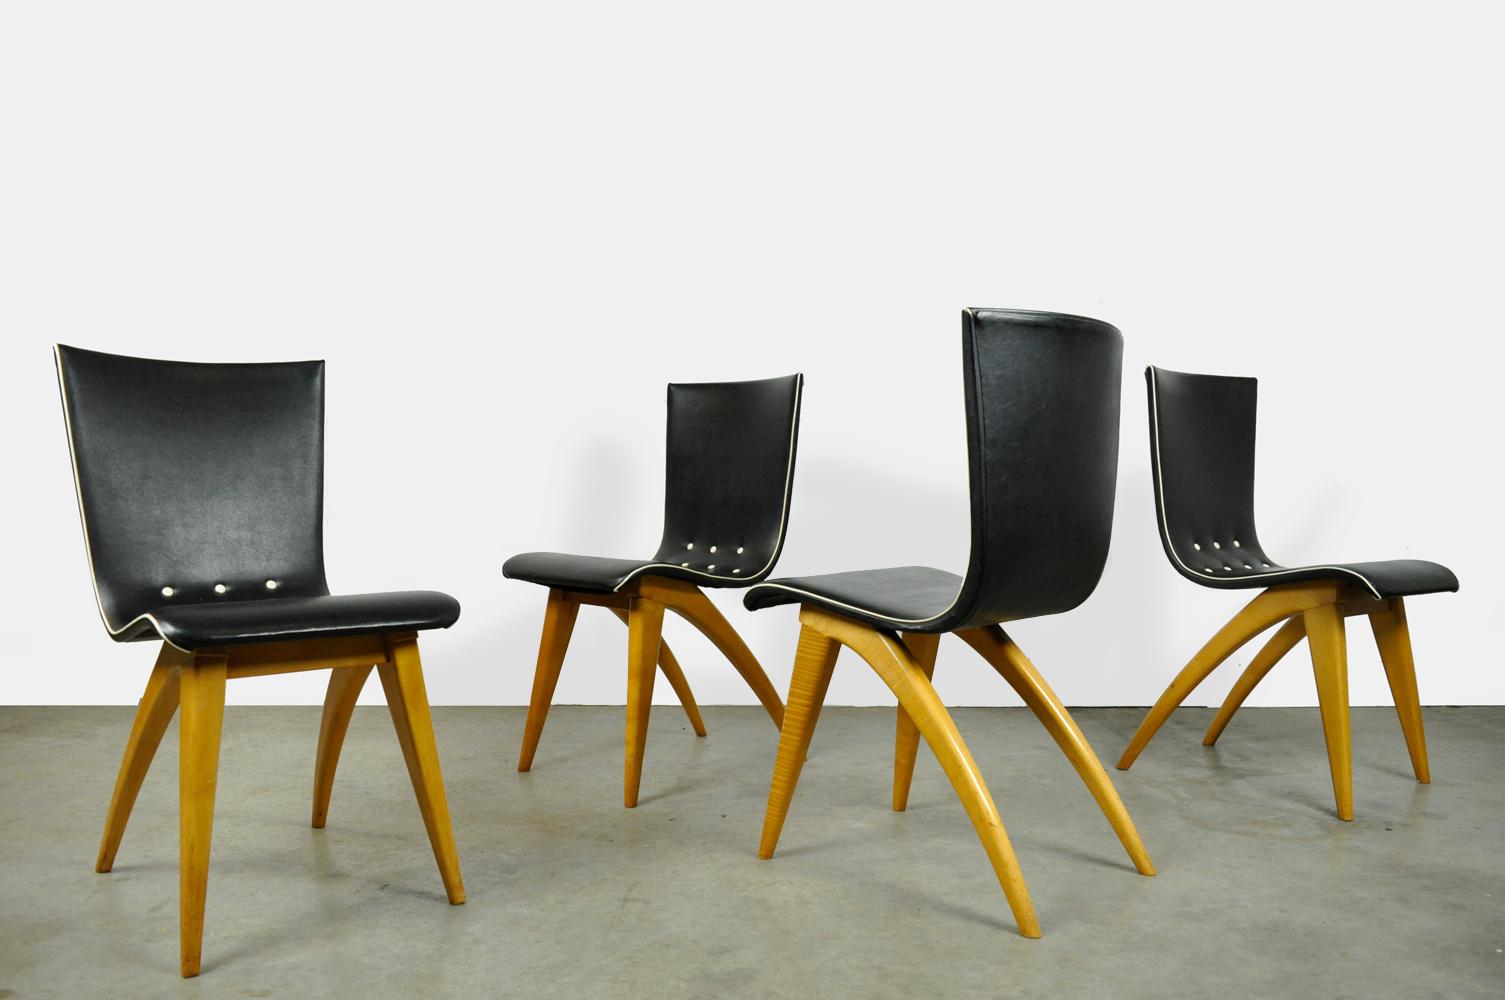 set of 4 uniquely designed dining table chairs designed by G.J. van Os and produced by van Os Culemborg, 1950s. The chairs have clear wooden legs, where the elegant rear legs together with the slightly flexible backrest determine the design of the